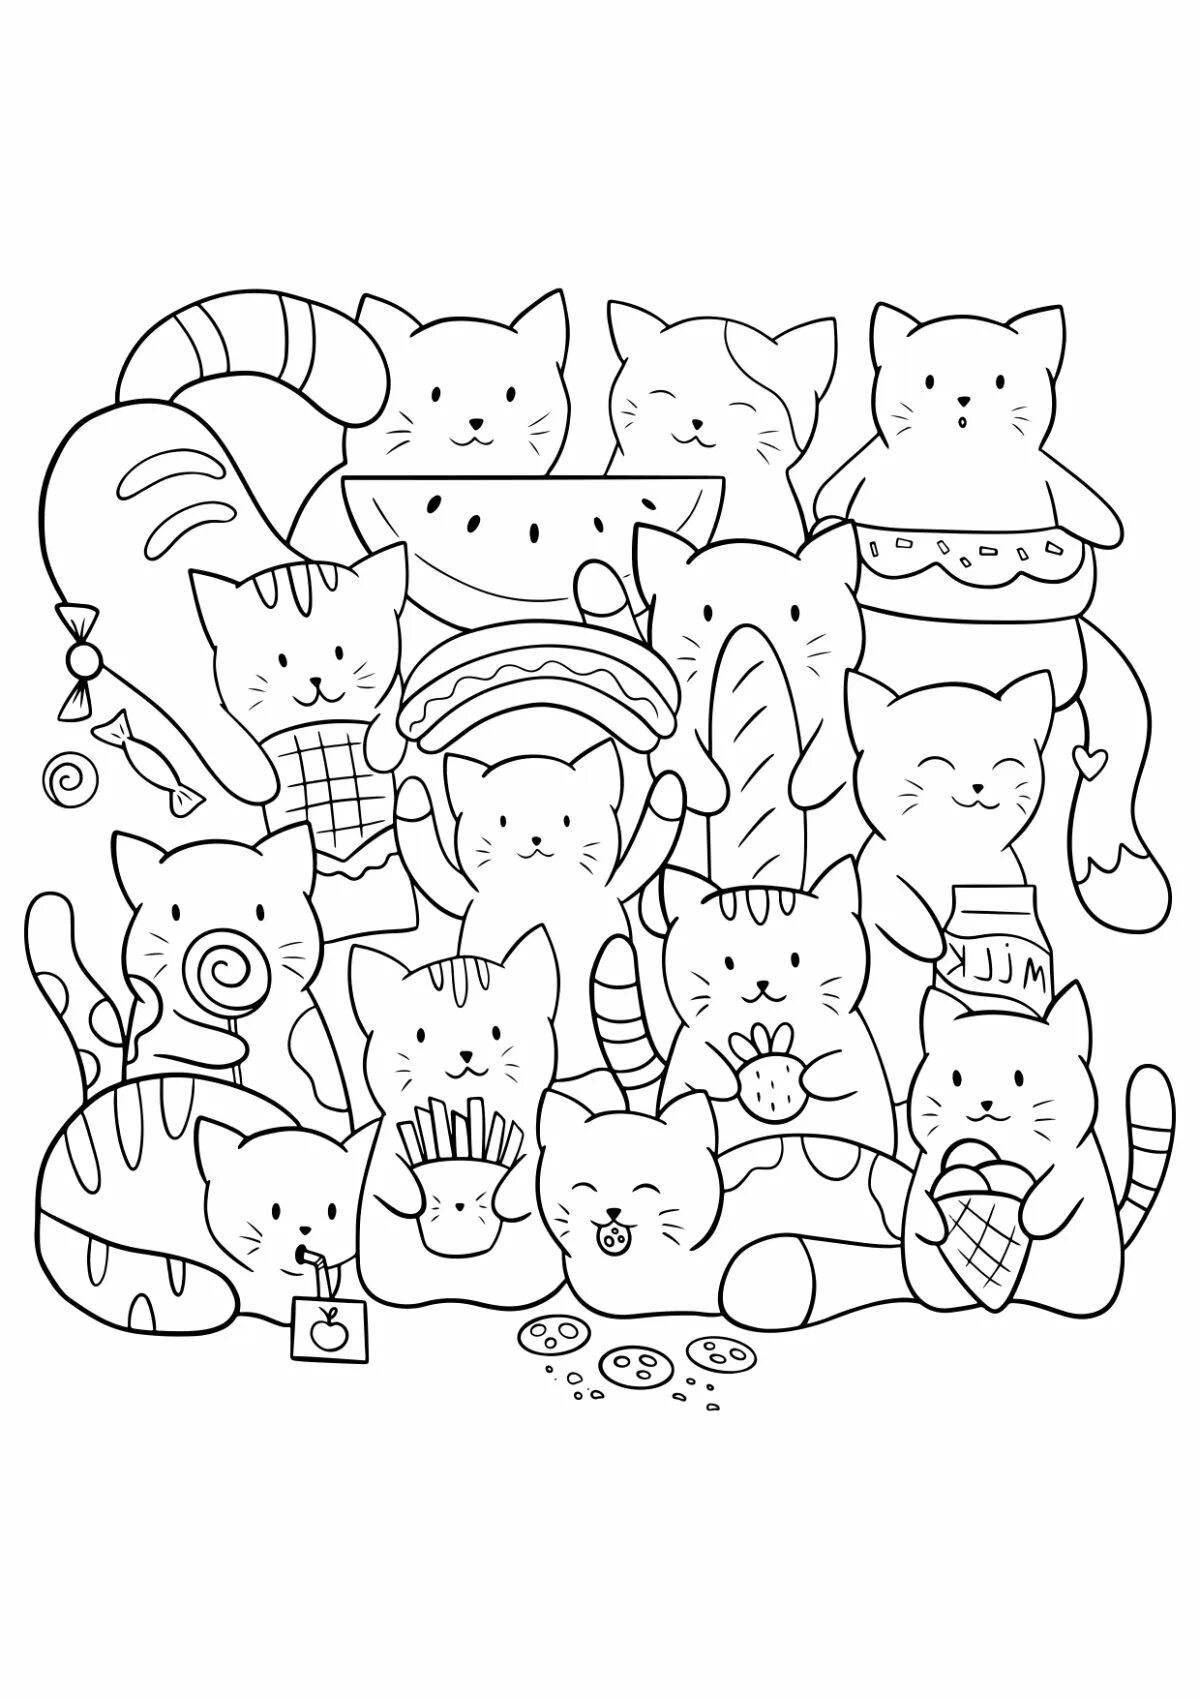 Live doodle antistress funny animals